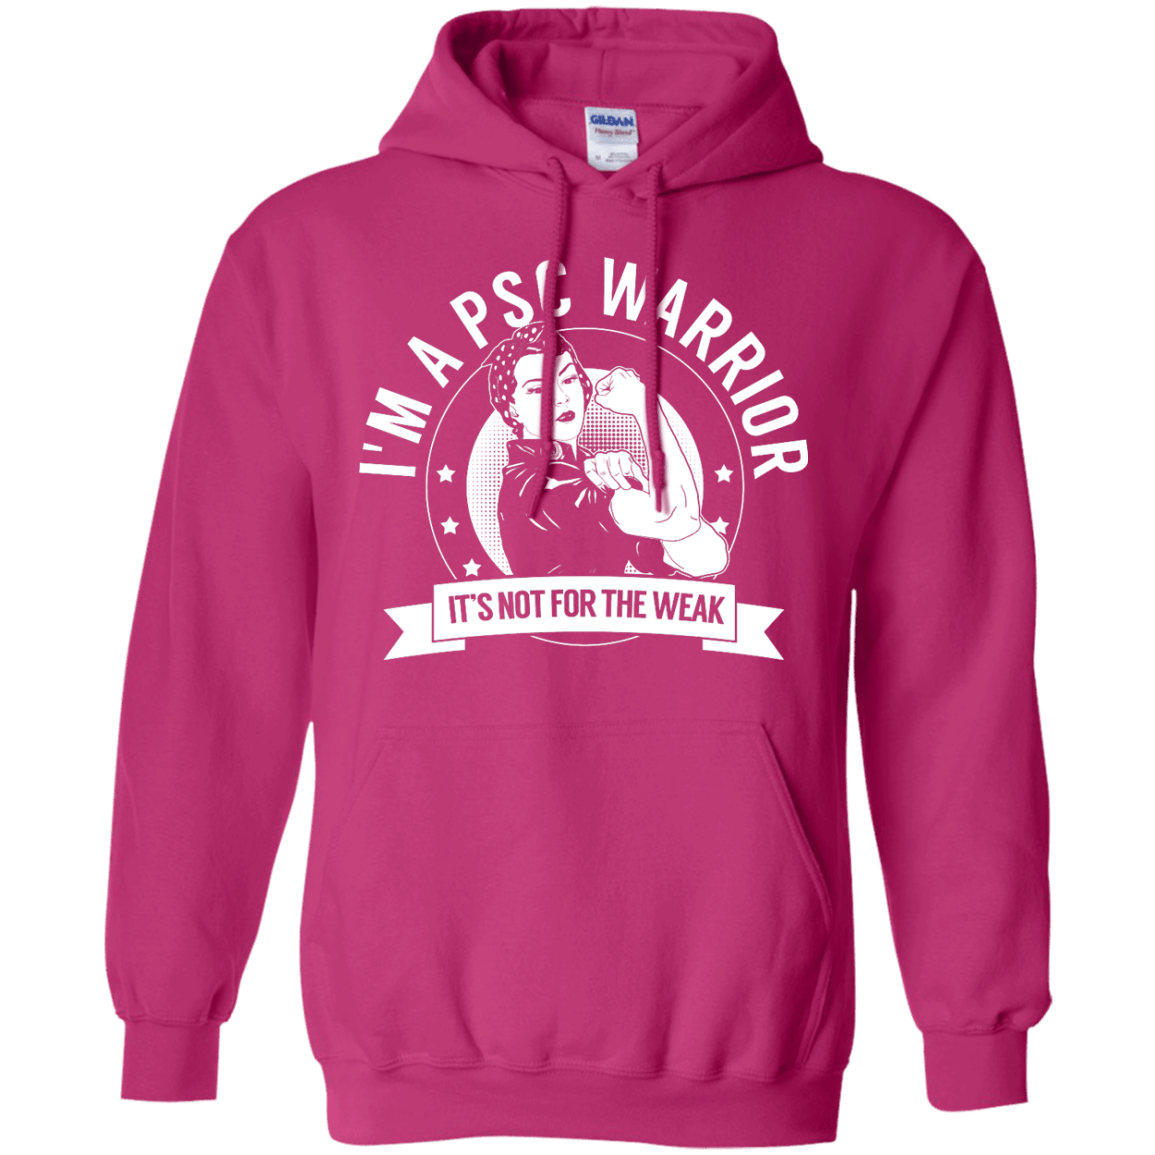 Primary Sclerosing Cholangitis - PSC Warrior Not For The Weak Pullover Hoodie 8 oz - The Unchargeables